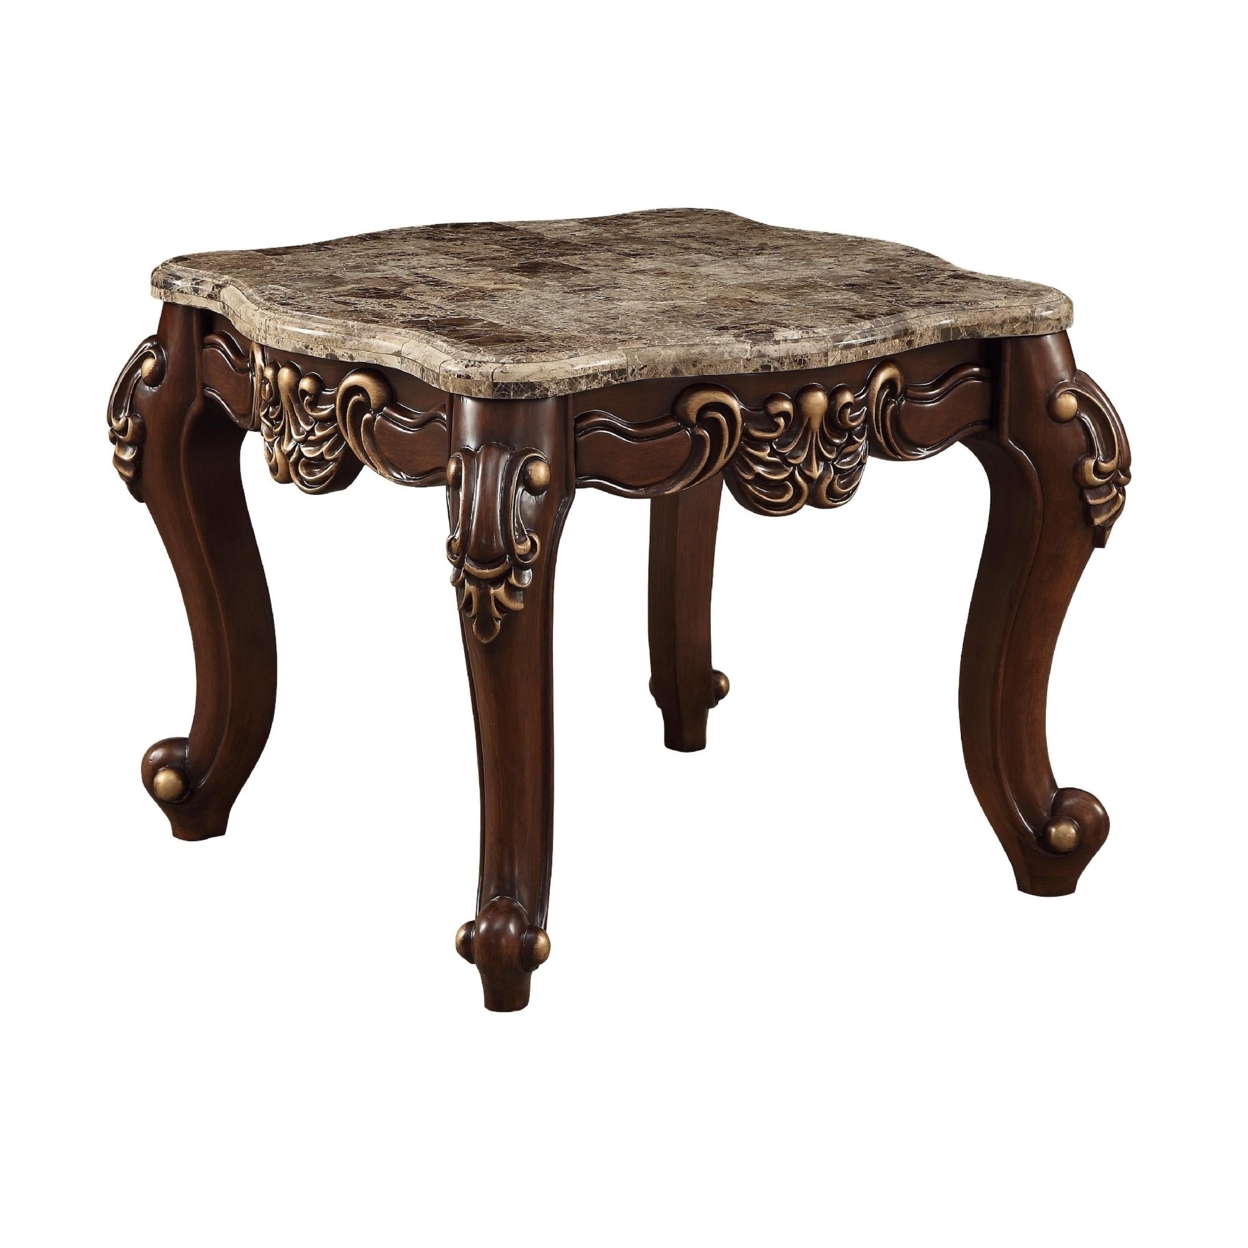 Square Marble Top End Table With Carved Floral Motifs Wooden Feet, Brown- Saltoro Sherpi